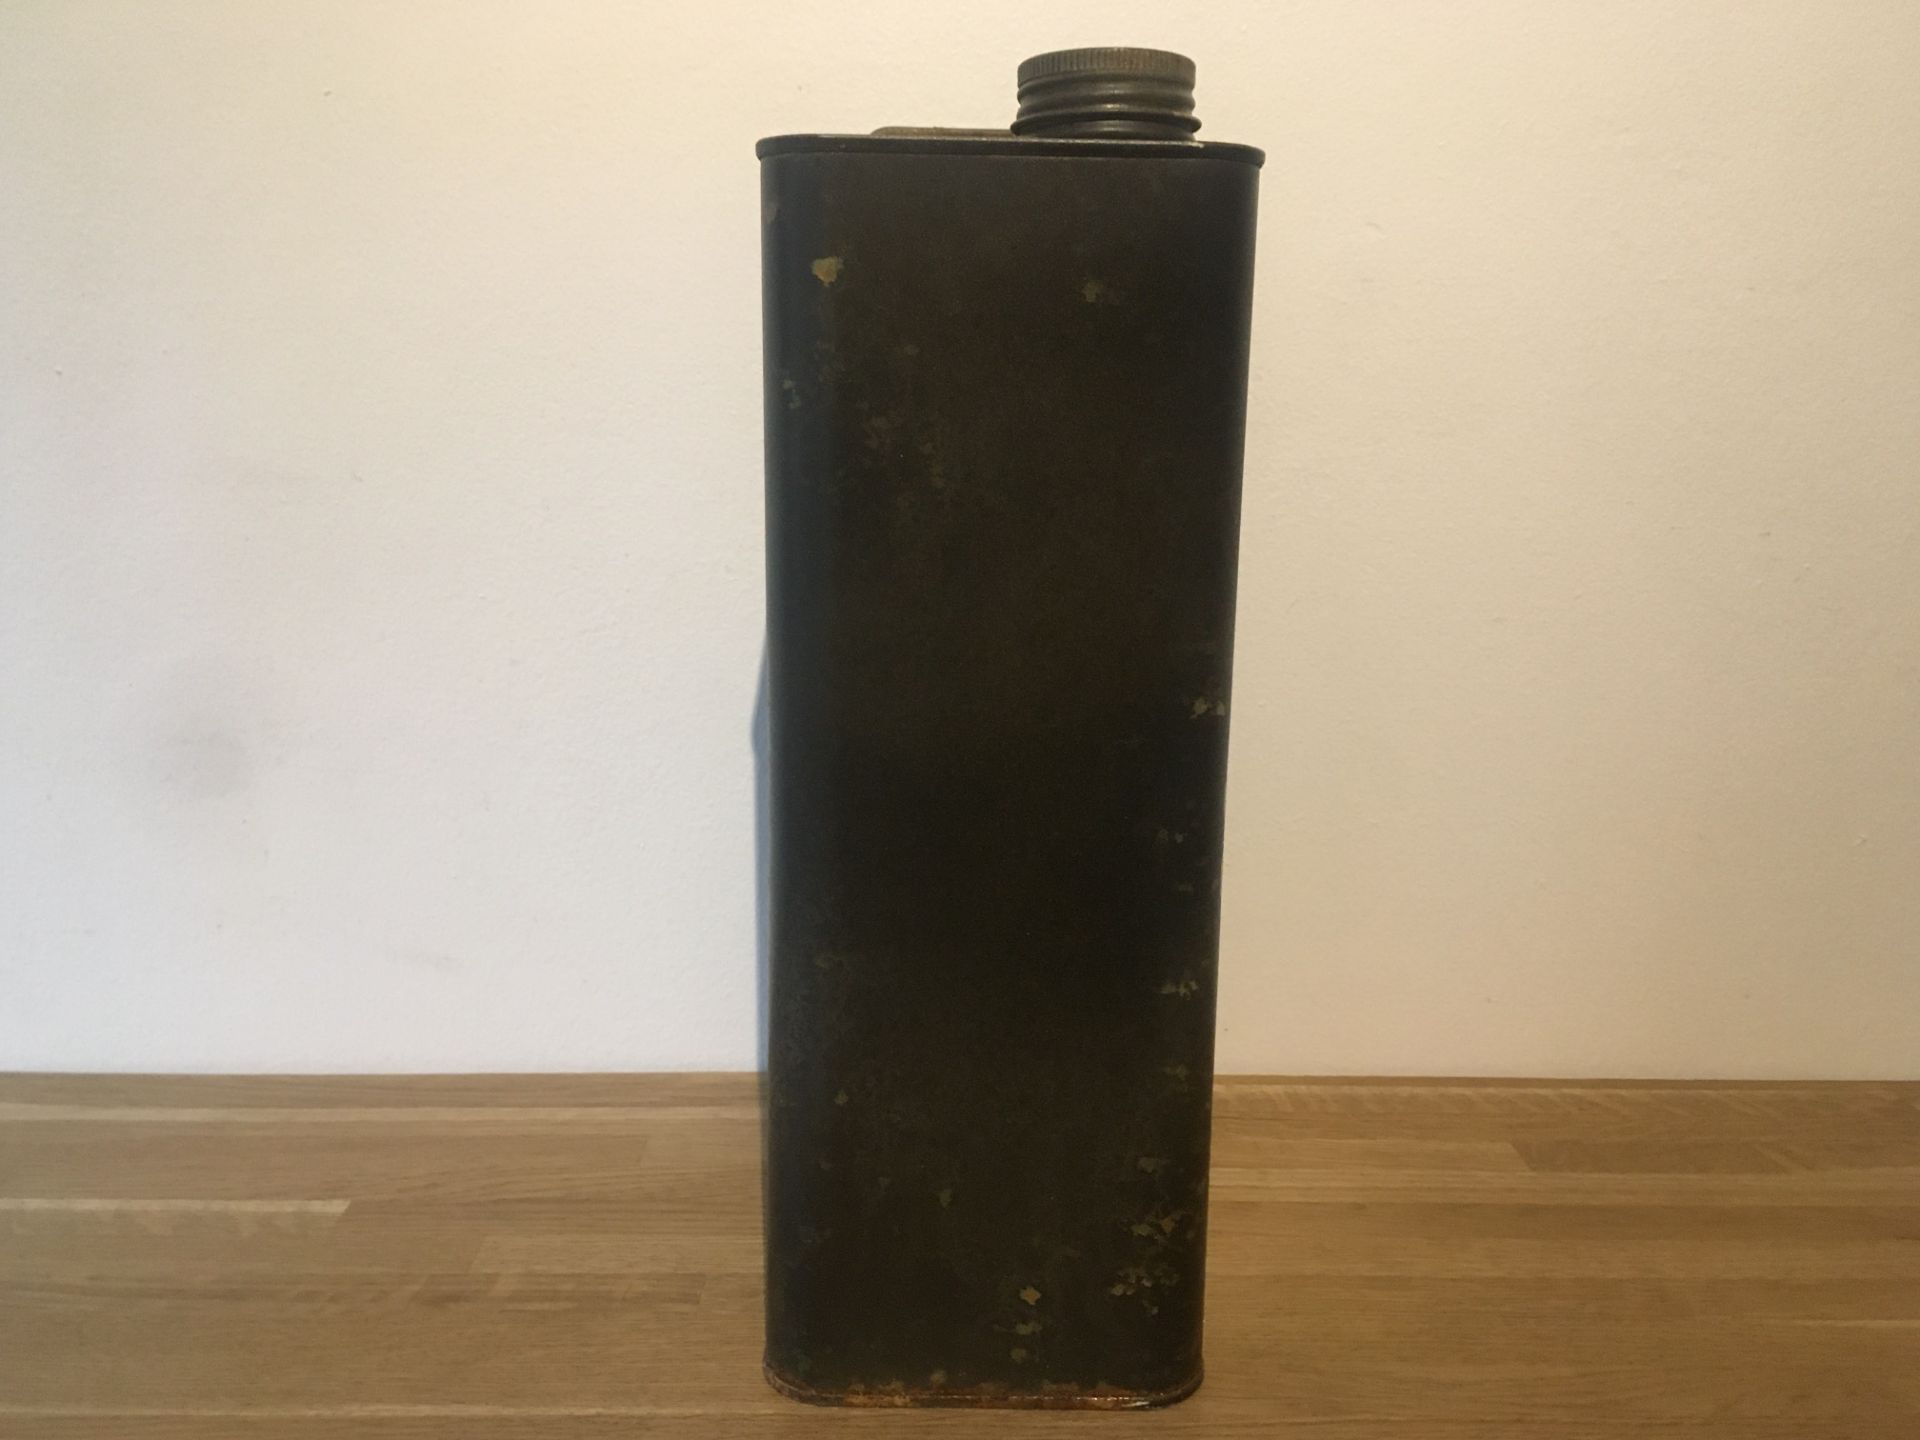 Shell Motor Oil Petrol Can - Image 4 of 6